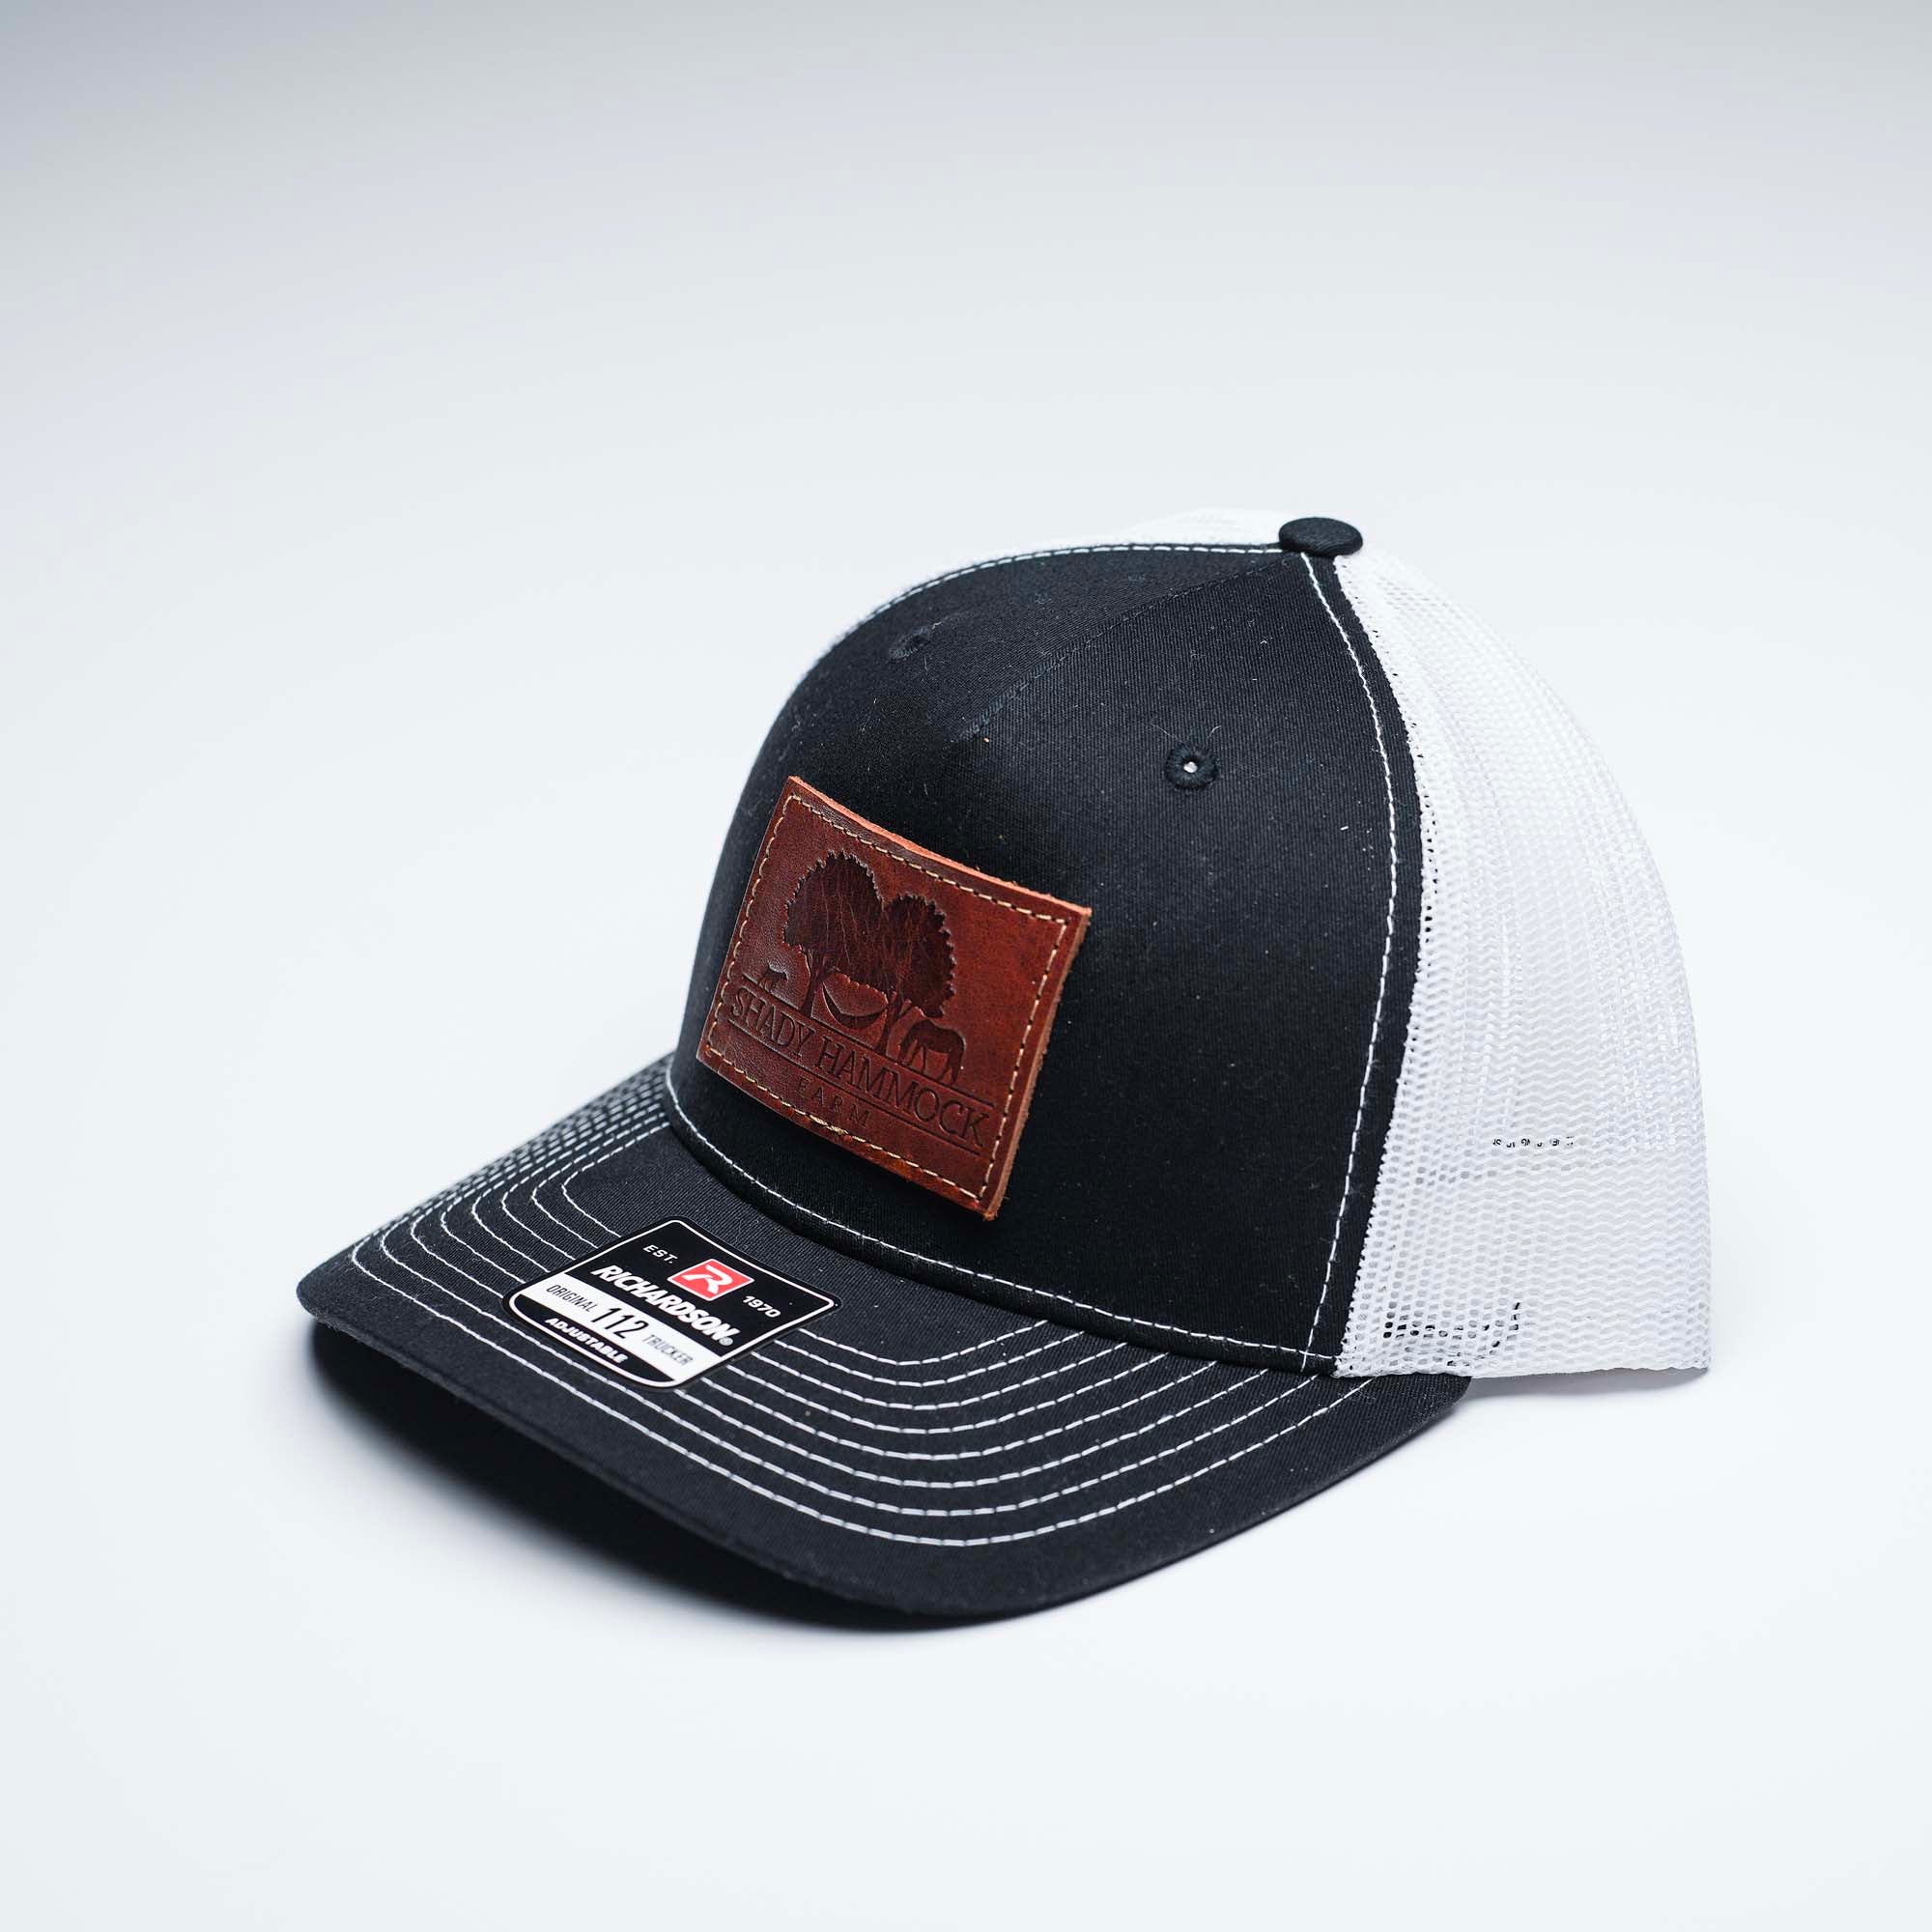 Debossed Heat Pressed - Richardson 112FP Five Panel Trucker Cap Custom Leather Patch Hat with YOUR LOGO